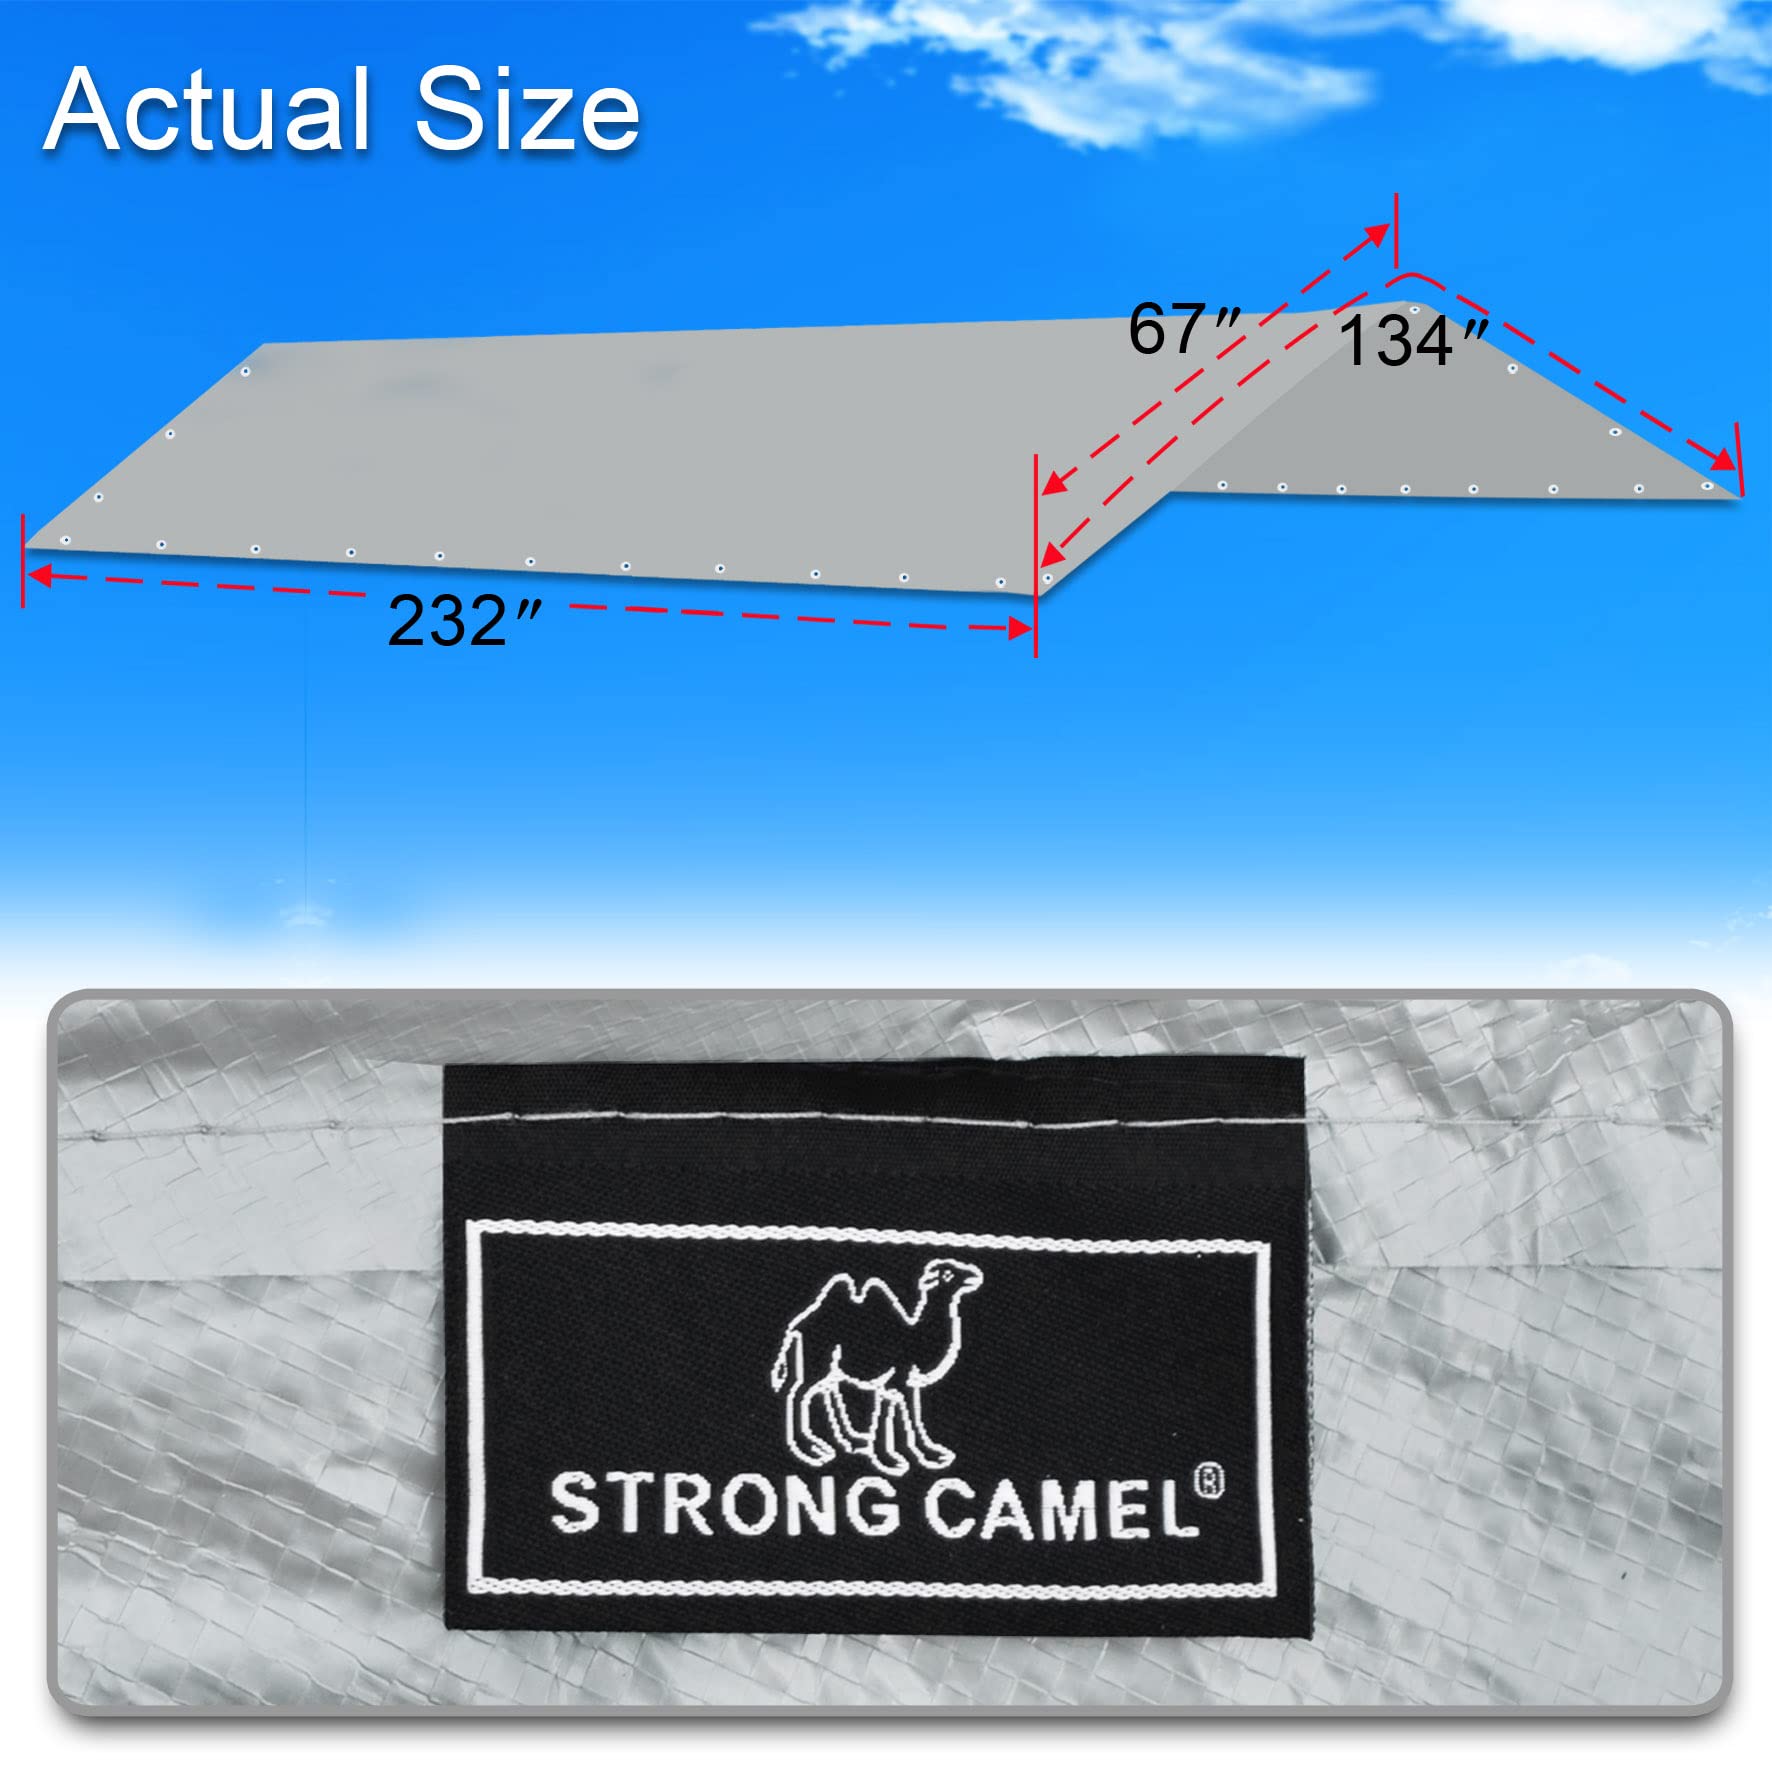 Strong Camel Carport Conopy Cover 10'x20' Replacement for Car Tent Outdoor Top Garage Shelter with Ball Bungees, SIL (Only Cover, Frame Not Included)